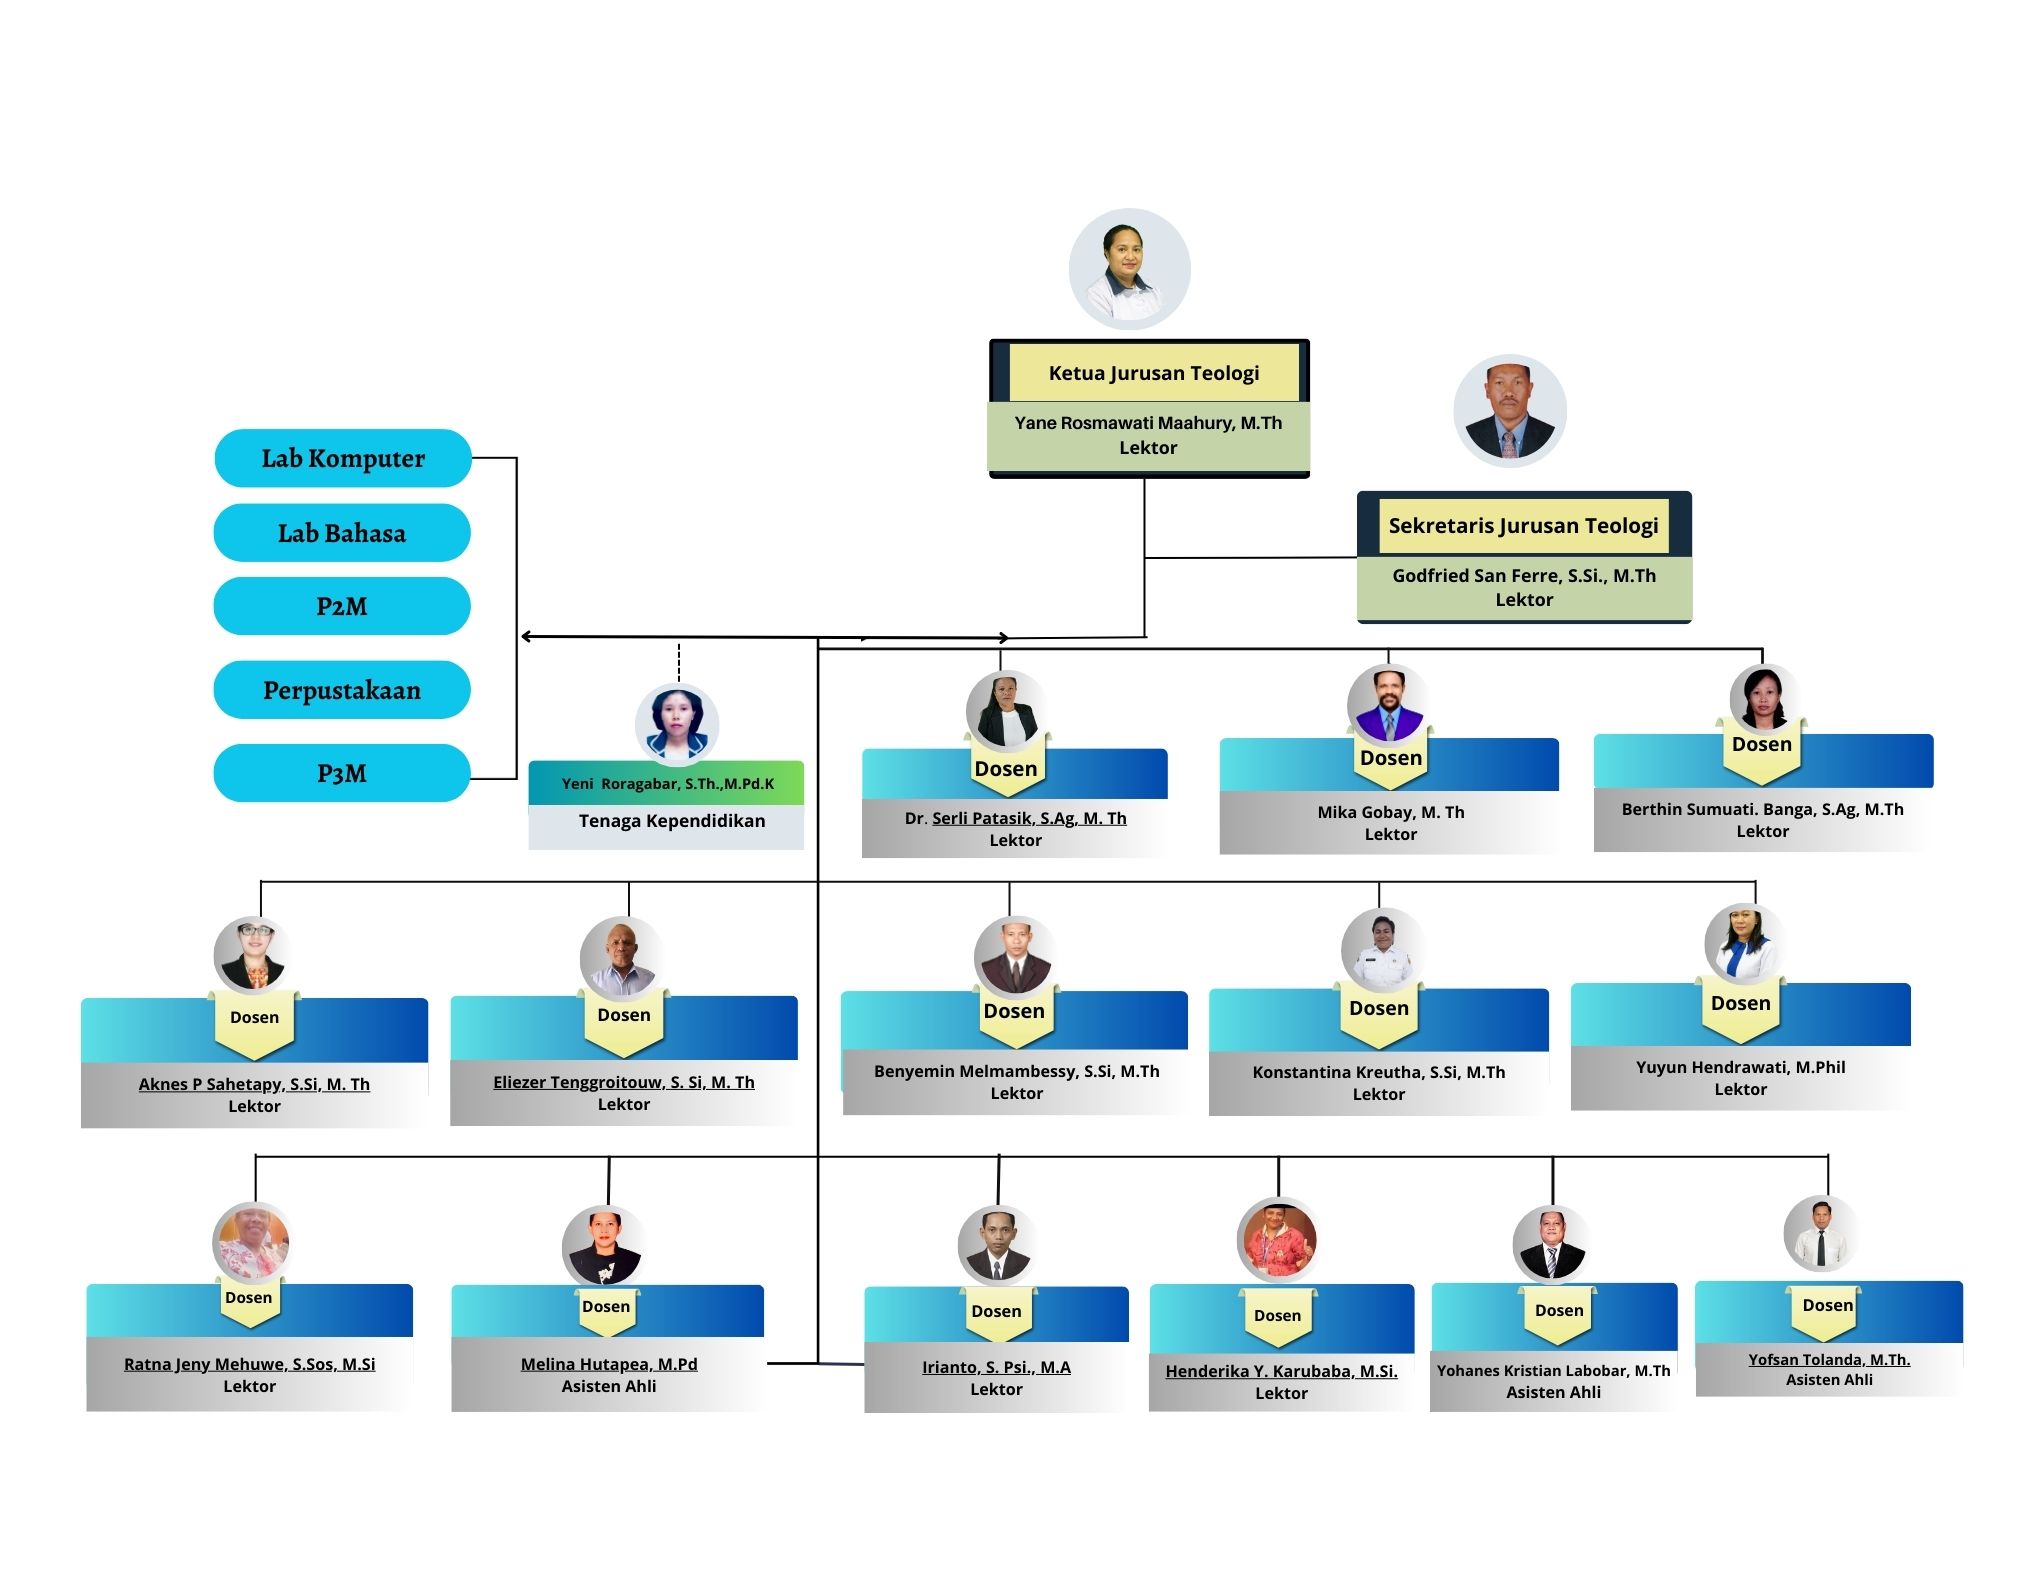 Blue Simple Organizational Structure Chart (1024 × 800 px) (1024 × 850 px) (1124 × 870 px) (1424 × 970 px) (1524 × 990 px) (1624 × 1000 px) (1824 × 1200 px) (1924 × 1270 px) (2024 × 1570 px) (5)